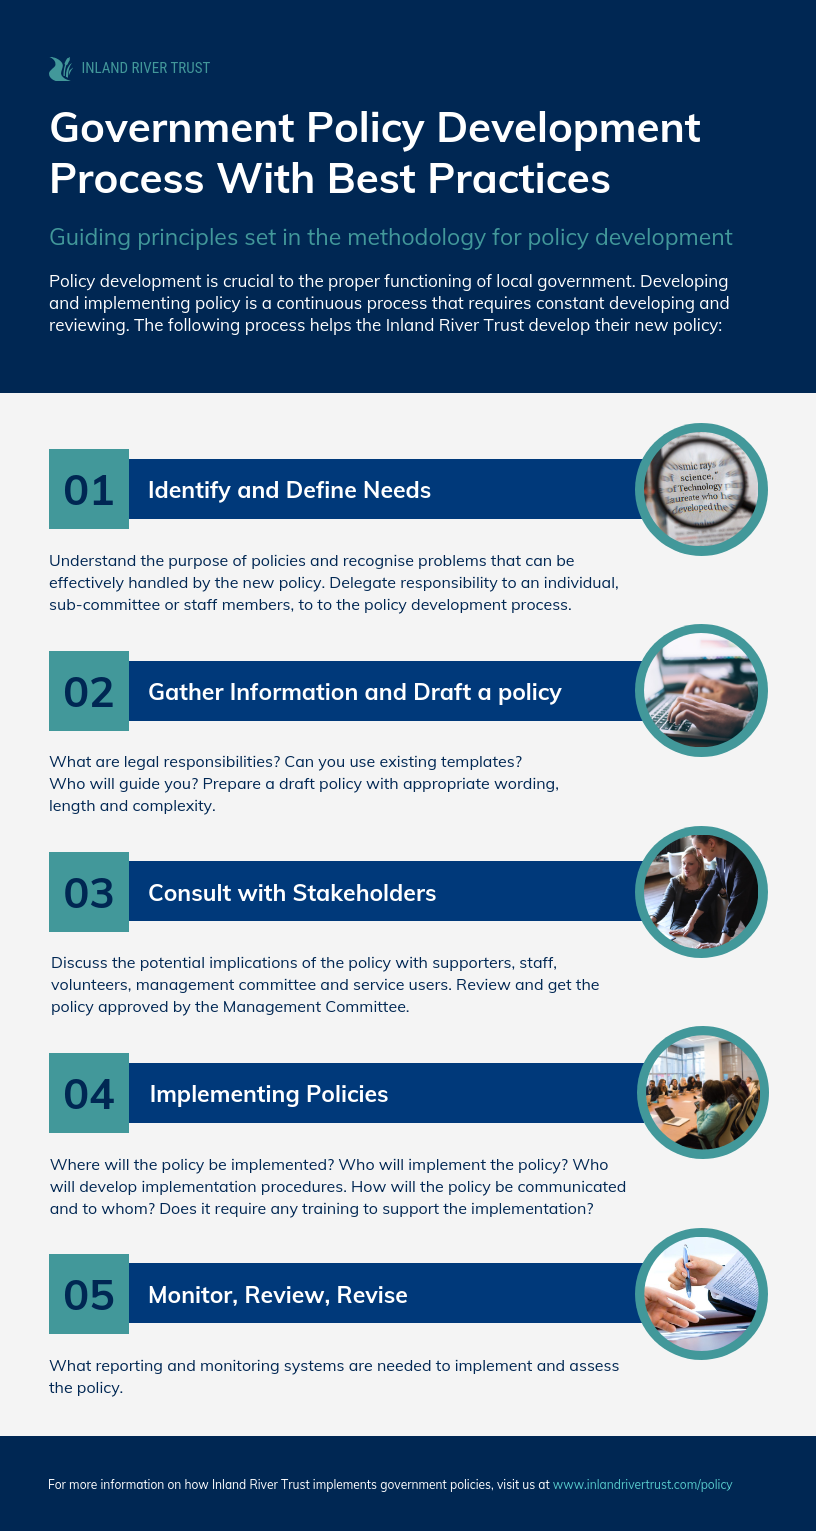 Infographic from Inland River Trust outlining their Government Policy Development Process with Best Practices. It details a five-step process for developing new policies: 1) Identify and Define Needs - understanding policy purpose and delegating responsibilities for policy development. 2) Gather Information and Draft a Policy - considering legal responsibilities, using templates, and preparing a draft with suitable wording. 3) Consult with Stakeholders - discussing implications with various groups and getting approval from the Management Committee. 4) Implementing Policies - deciding where and by whom the policy will be implemented, developing procedures, communication strategies, and any required training. 5) Monitor, Review, Revise - establishing reporting and monitoring systems to assess the policy. The bottom of the infographic directs readers to www.inlandrivertrust.com/policy for more information.